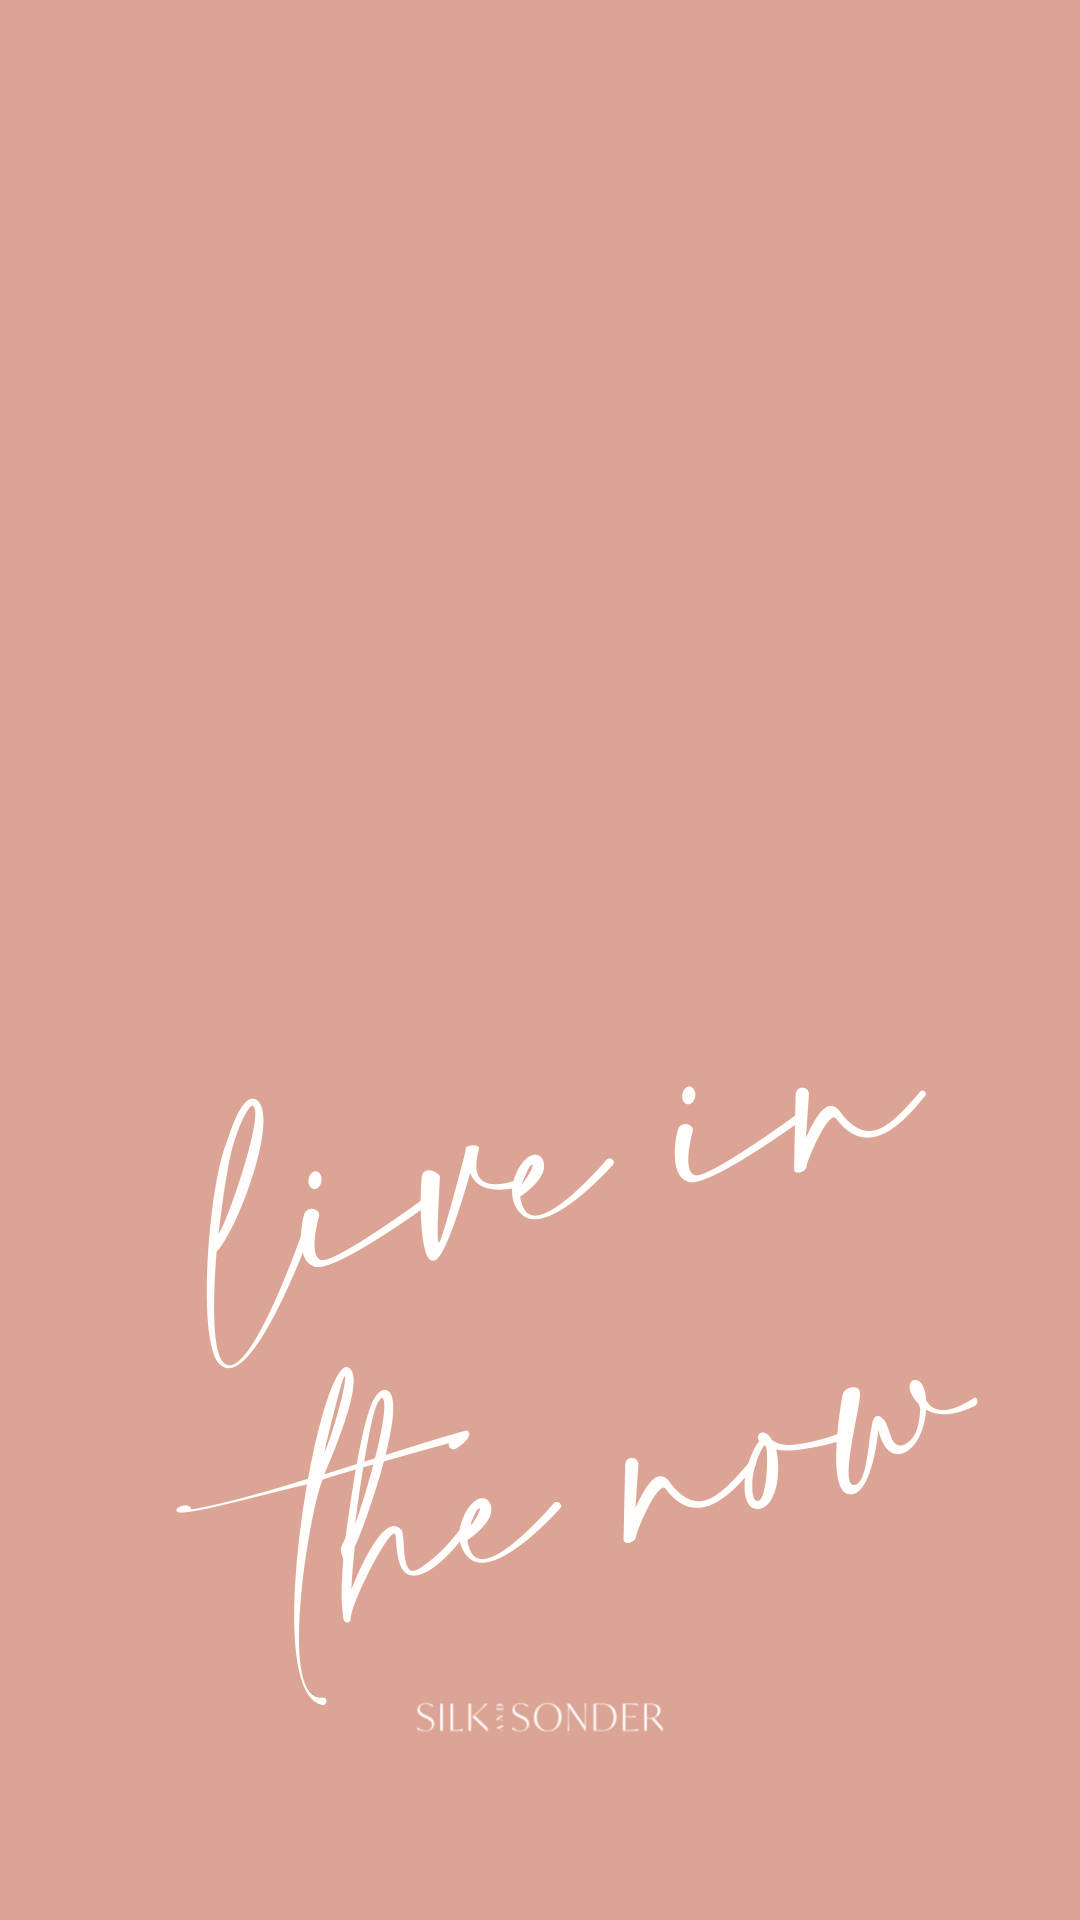 FREE January Wallpaper To Help You Manifest Your Best Life